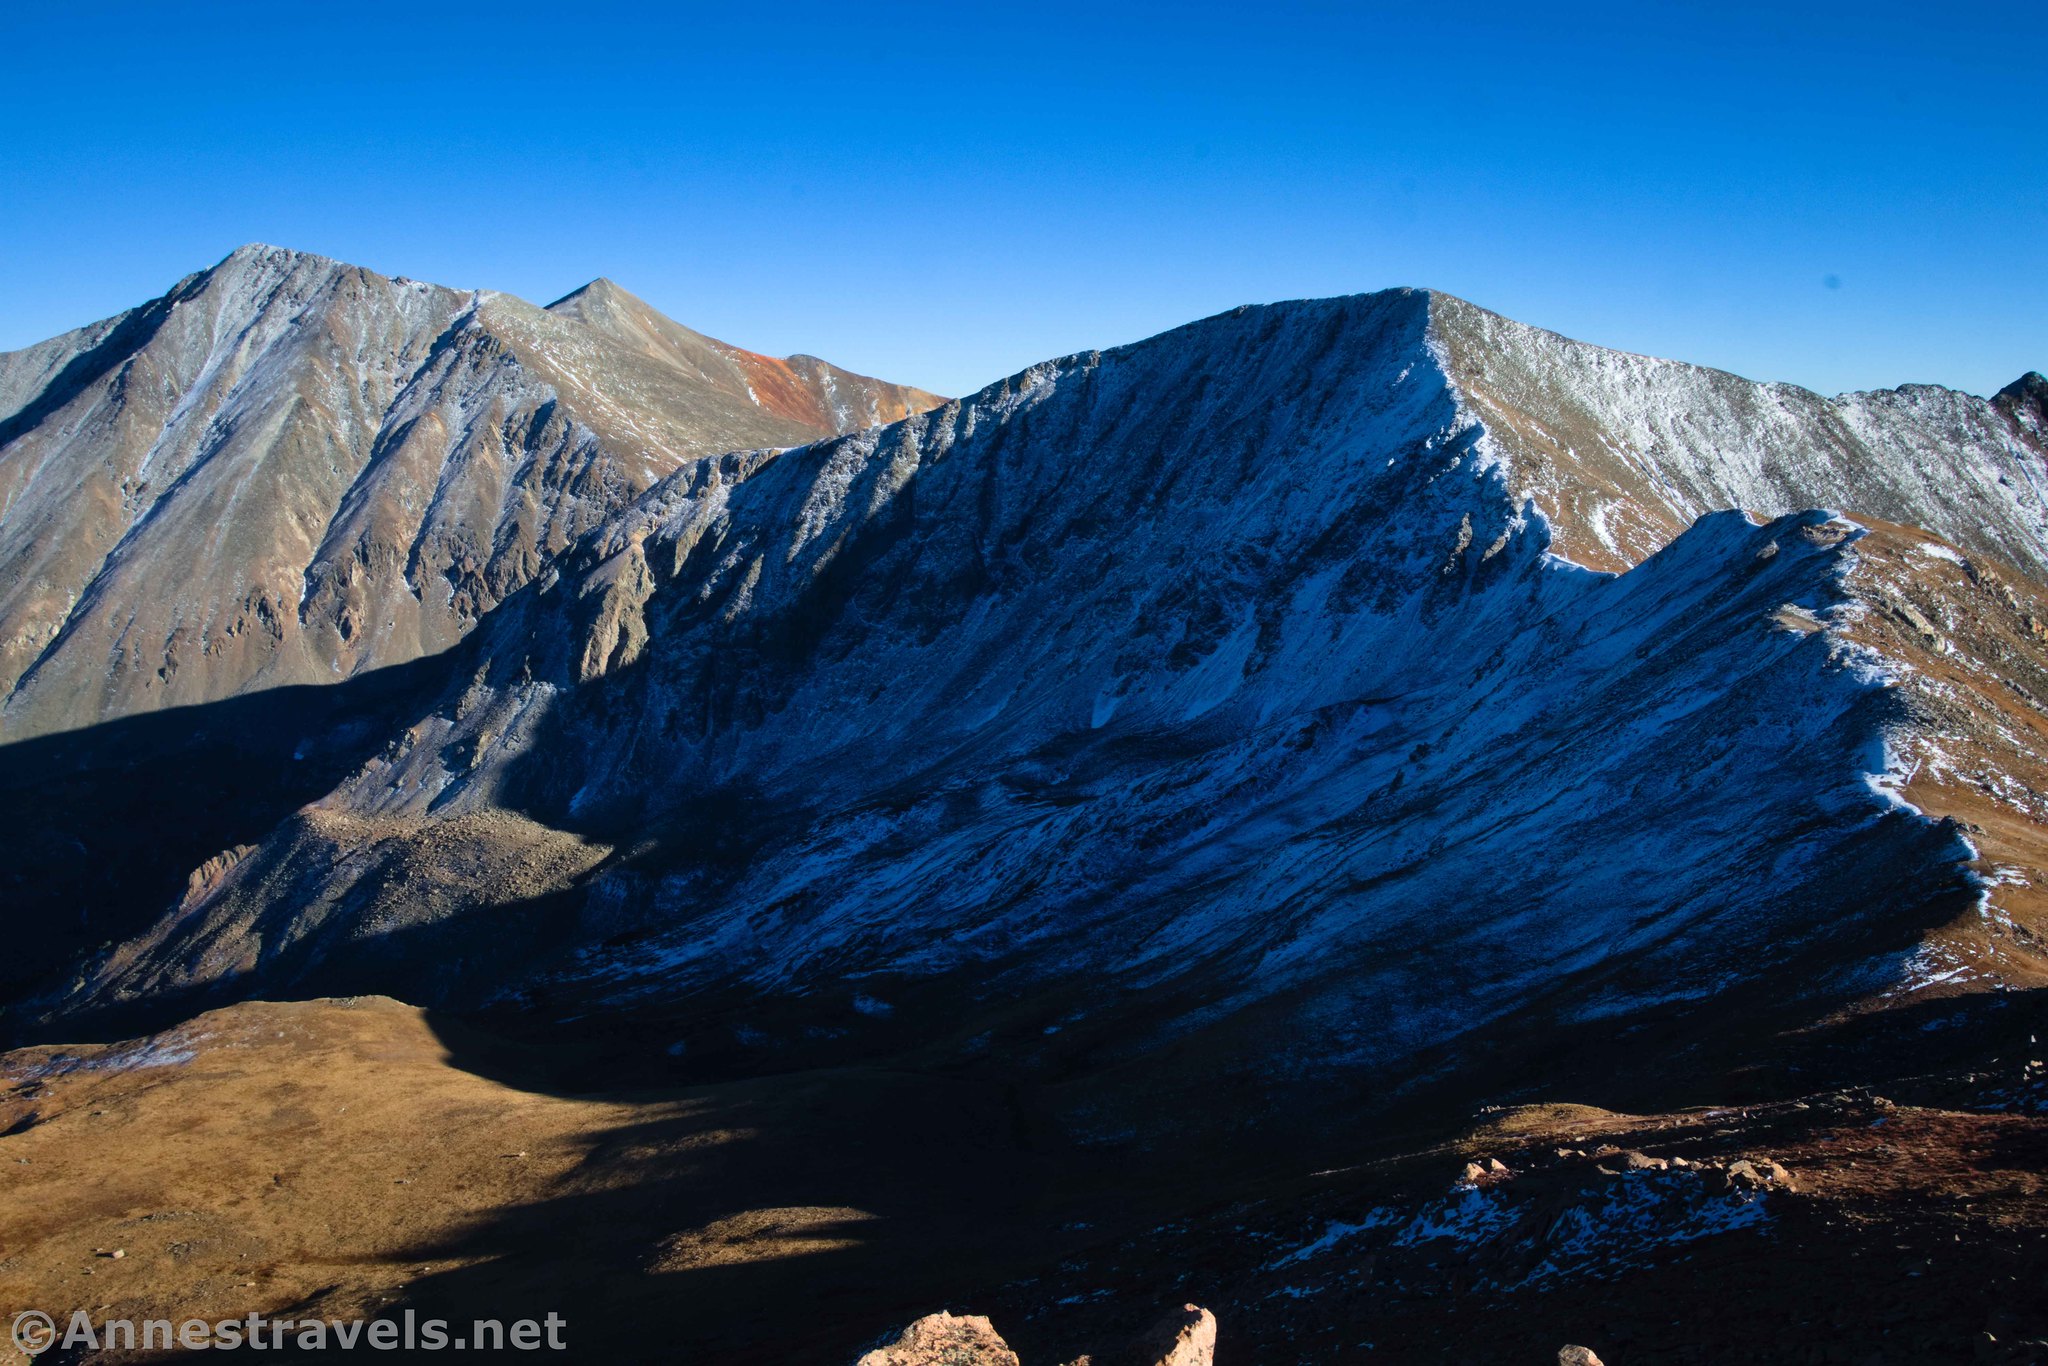 Torreys Peak, Grays Peak, and Grizzly Peak from Cupid Peak on a late autumn afternoon, Arapaho National Forest, Colorado